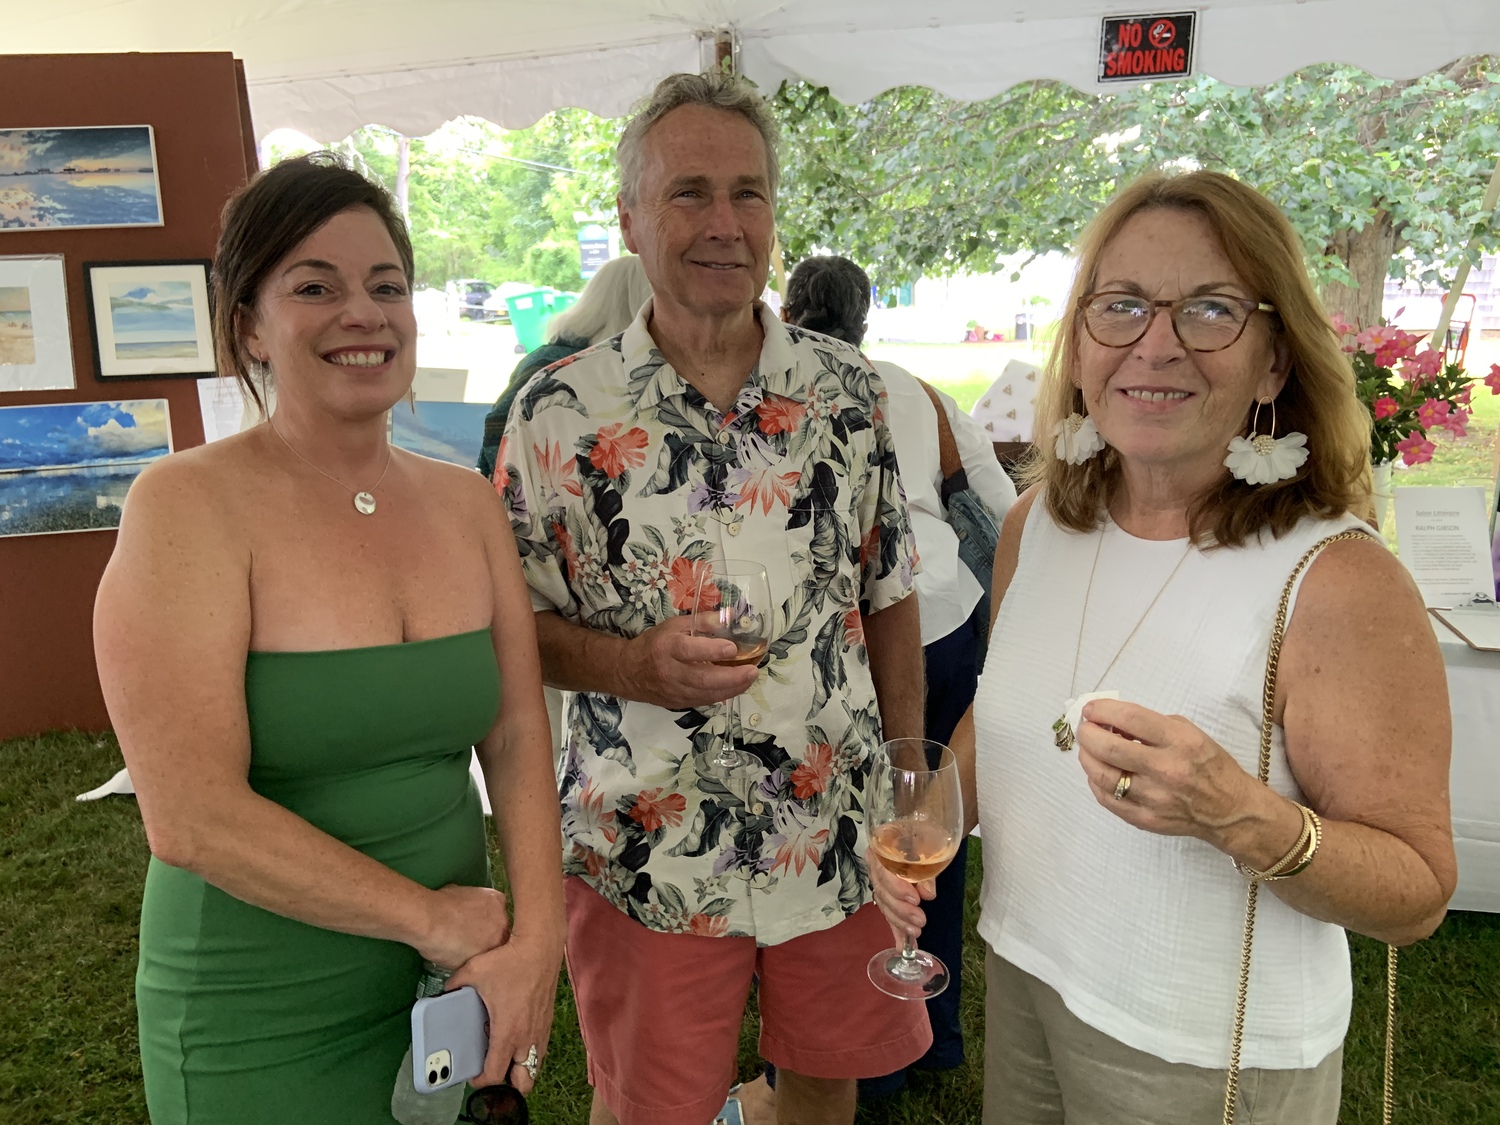 Sag Harbor Historical Museum board member Angela Inzerillo with Bruce and Vee Bennet at the museum's annual summer party. STEPHEN J. KOTZ